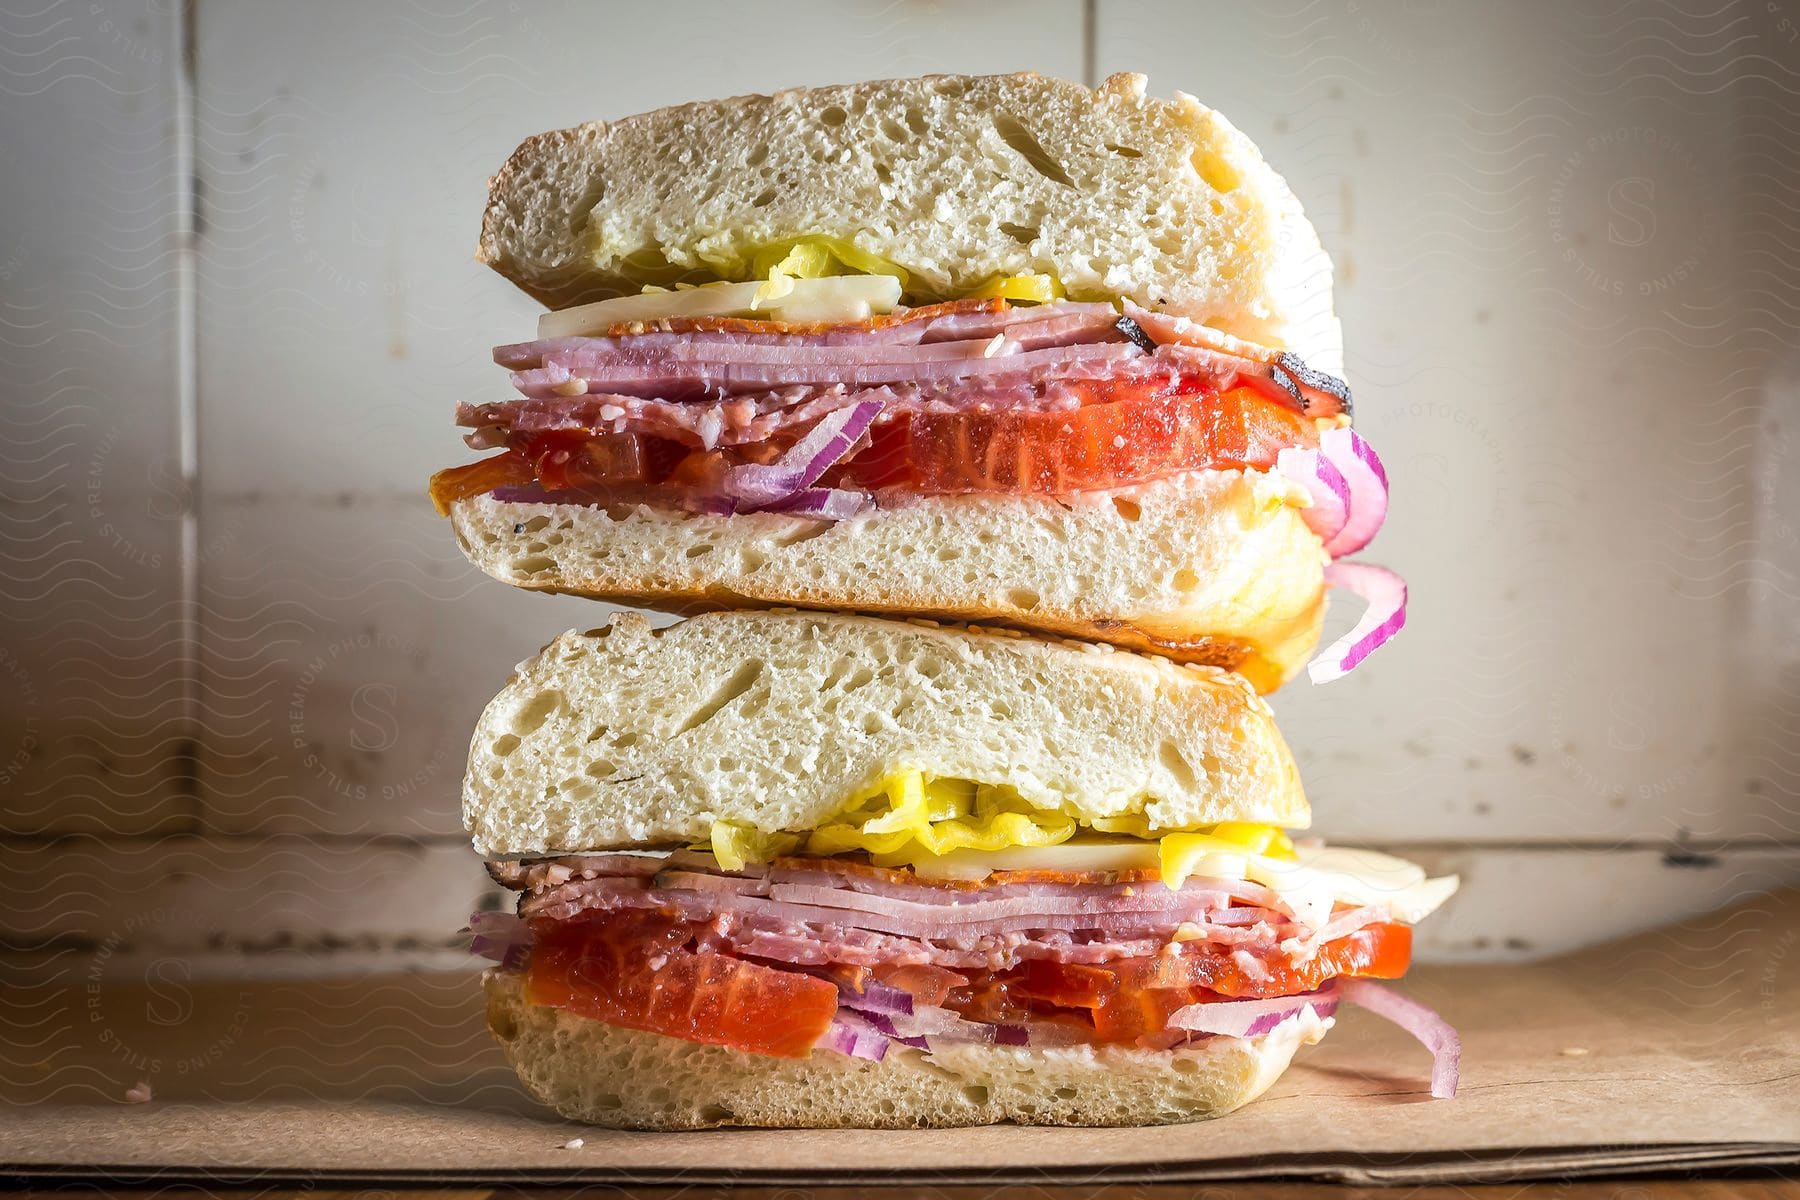 Stock photo of two halves of a full sandwich stacked on top of each other